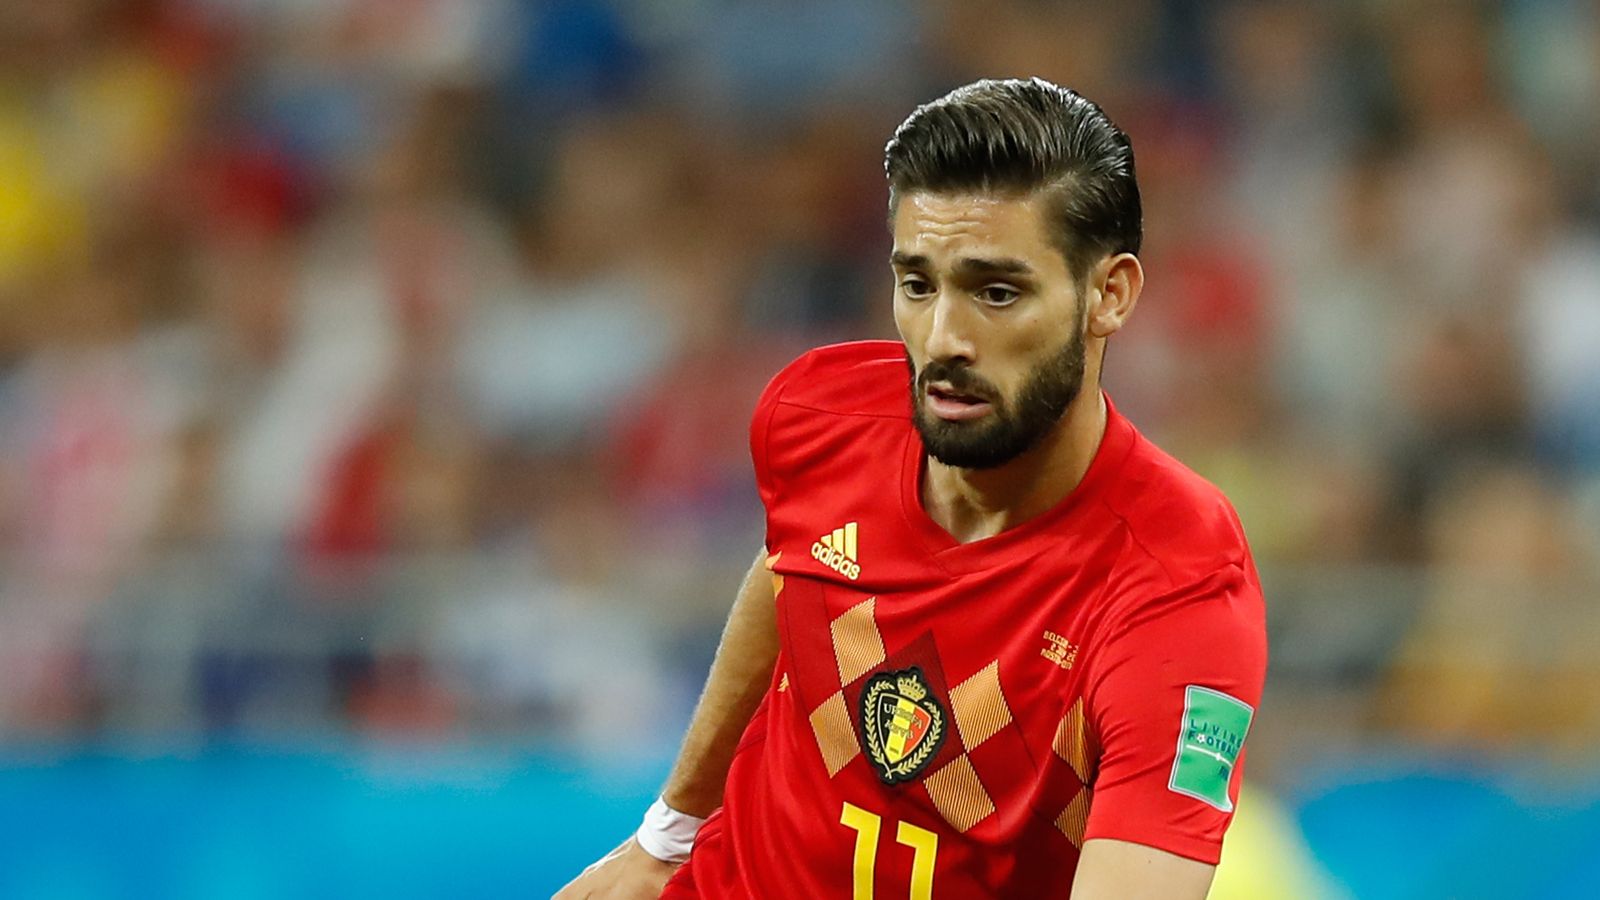 Yannick Carrasco says they are disappointed with Thibaut Courtois